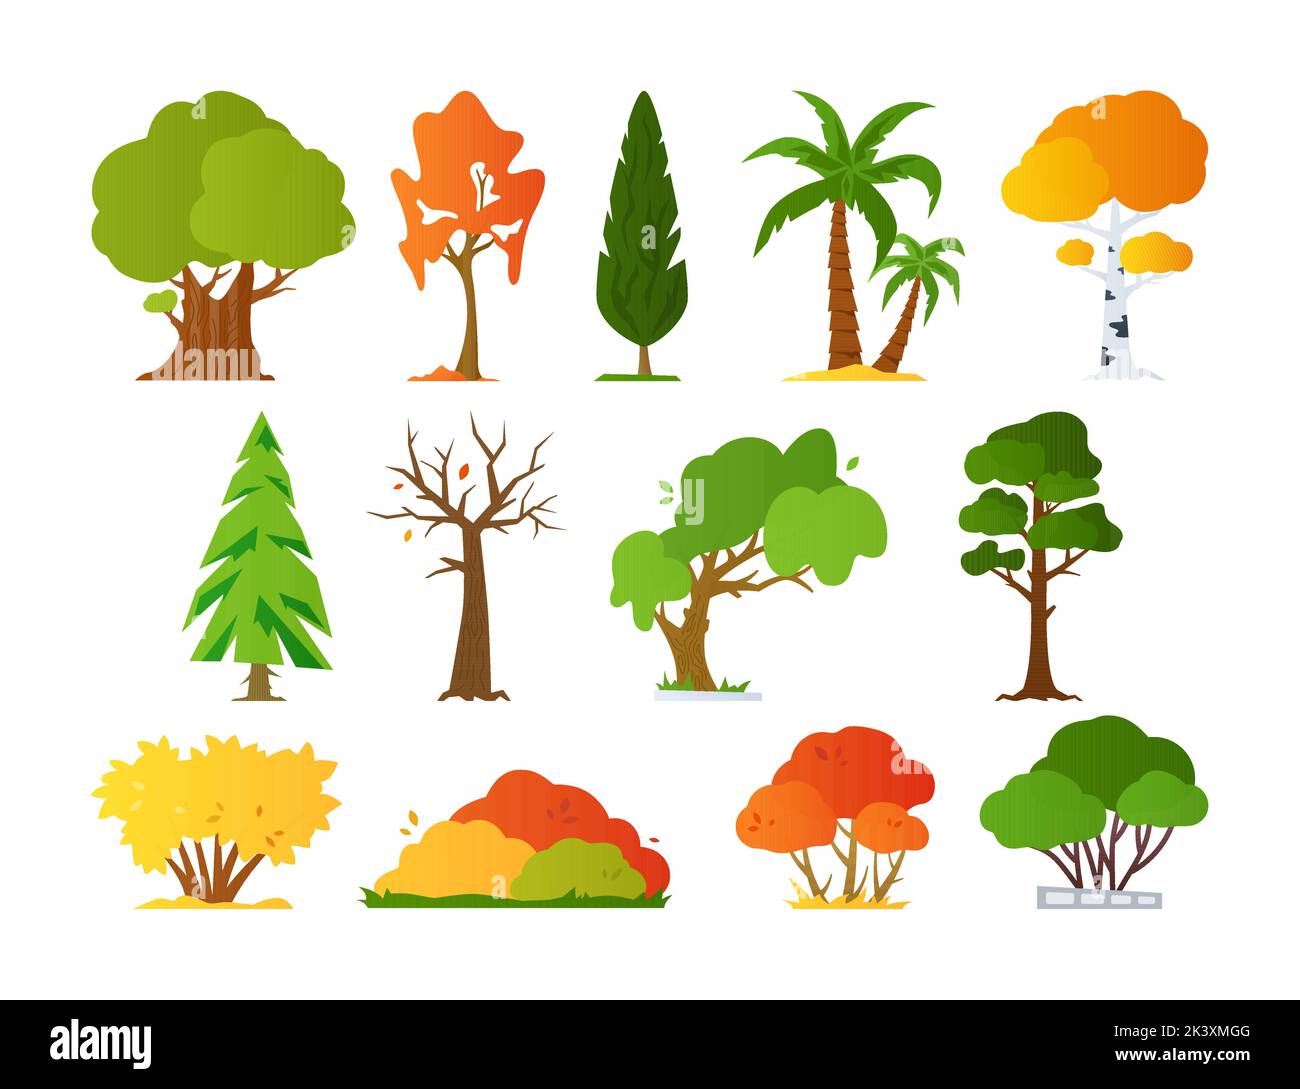 Summer and autumn trees - flat design style objects set Stock Vector